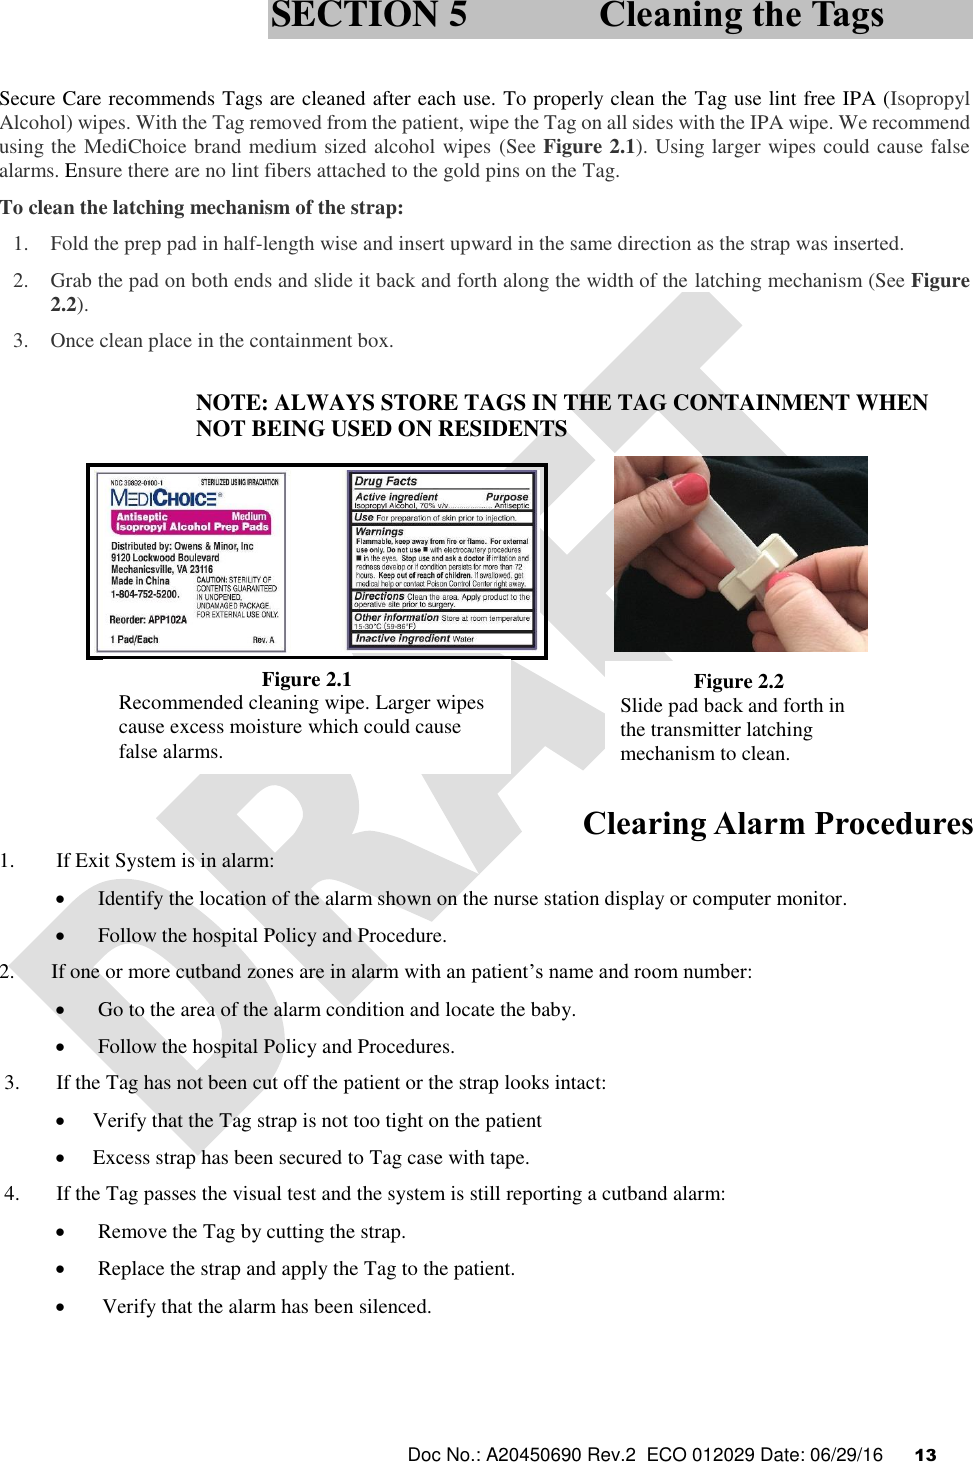  Doc No.: A20450690 Rev.2  ECO 012029 Date: 06/29/16      13    Secure Care recommends Tags are cleaned after each use. To properly clean the Tag use lint free IPA (Isopropyl Alcohol) wipes. With the Tag removed from the patient, wipe the Tag on all sides with the IPA wipe. We recommend using the MediChoice brand medium sized alcohol wipes (See Figure 2.1). Using larger wipes could cause false alarms. Ensure there are no lint fibers attached to the gold pins on the Tag.  To clean the latching mechanism of the strap: 1. Fold the prep pad in half-length wise and insert upward in the same direction as the strap was inserted. 2. Grab the pad on both ends and slide it back and forth along the width of the latching mechanism (See Figure 2.2). 3. Once clean place in the containment box.  NOTE: ALWAYS STORE TAGS IN THE TAG CONTAINMENT WHEN NOT BEING USED ON RESIDENTS             Clearing Alarm Procedures 1.        If Exit System is in alarm:   Identify the location of the alarm shown on the nurse station display or computer monitor.    Follow the hospital Policy and Procedure. 2.       If one or more cutband zones are in alarm with an patient’s name and room number:   Go to the area of the alarm condition and locate the baby.   Follow the hospital Policy and Procedures.  3.       If the Tag has not been cut off the patient or the strap looks intact:   Verify that the Tag strap is not too tight on the patient  Excess strap has been secured to Tag case with tape.  4.       If the Tag passes the visual test and the system is still reporting a cutband alarm:   Remove the Tag by cutting the strap.   Replace the strap and apply the Tag to the patient.  Verify that the alarm has been silenced.  SECTION 5 Cleaning the Tags Figure 2.1 Recommended cleaning wipe. Larger wipes cause excess moisture which could cause false alarms. Figure 2.2 Slide pad back and forth in the transmitter latching mechanism to clean.  